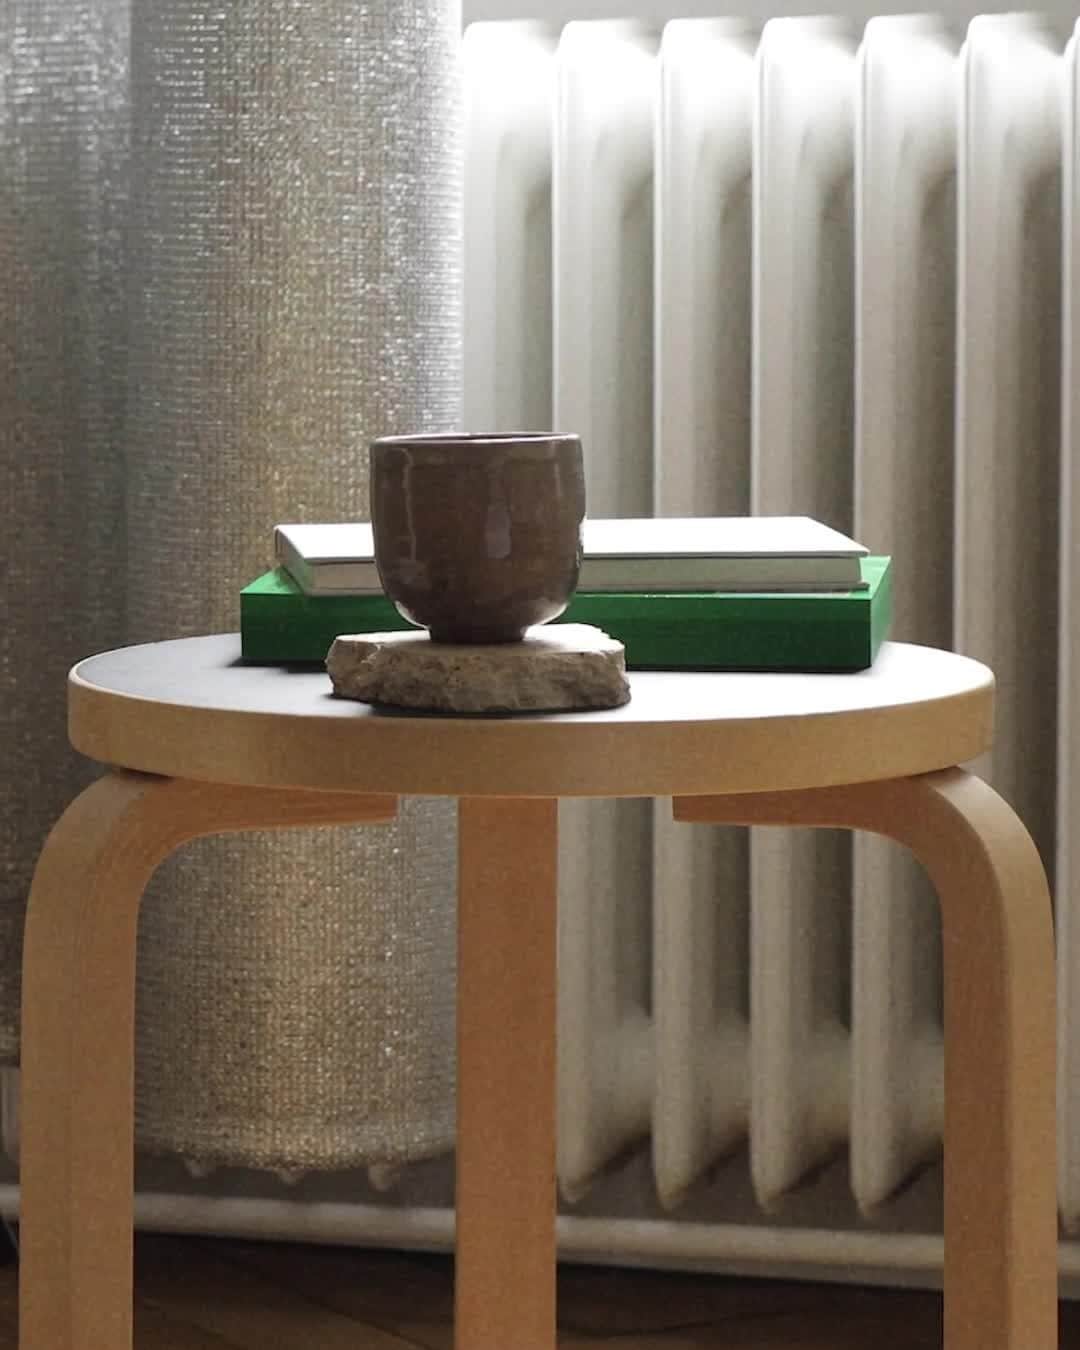 Artekのインスタグラム：「Stool 60: a companion for life.⁠ ⁠ We’re delighted to see Stool 60 being part of your lives and how much this humble stool means to you. The "Stool 60, a companion for life" giveaway is still open until September 29th. Make sure to join the celebration and win a Stool 60.⁠ ⁠ How to enter: ⁠ - Produce a piece of art, a photo or even a video that shows Stool 60 as your companion for life. ⁠ - Post it on Instagram and/or Facebook tagging @artekglobal and using the hashtag #90yearsofstool60⁠ ⁠ To learn more and for the T&C´s visit the link in bio. ⁠ ⁠ #90yearsofstool60」